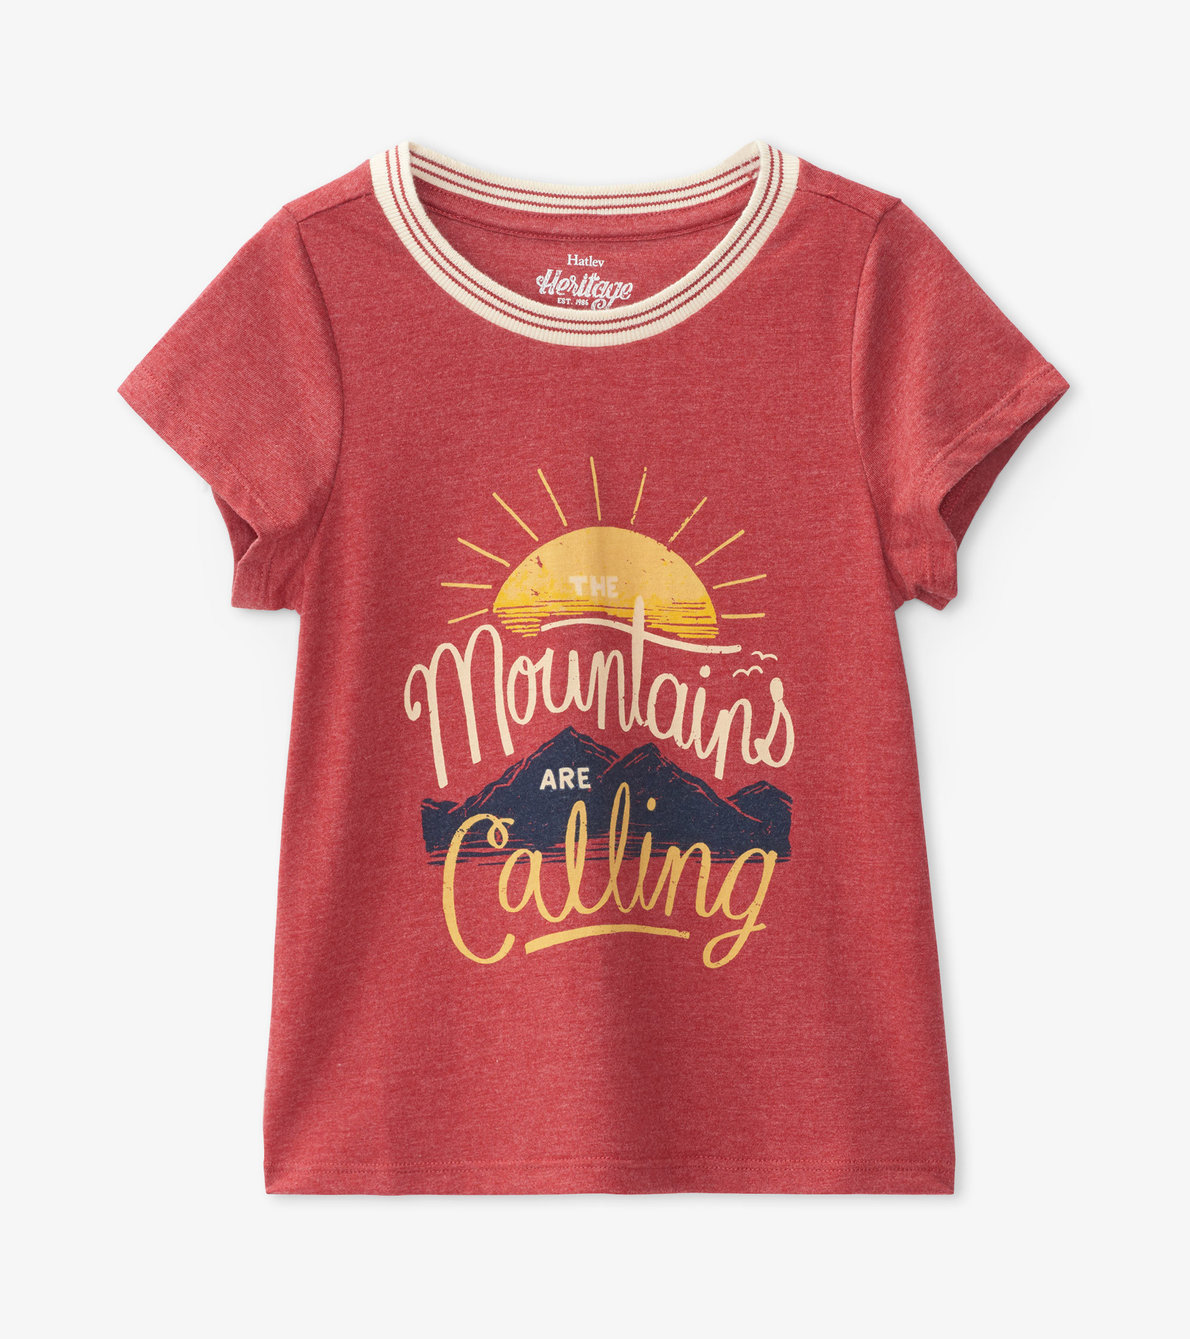 View larger image of Mountains are Calling Kids Heritage Tee